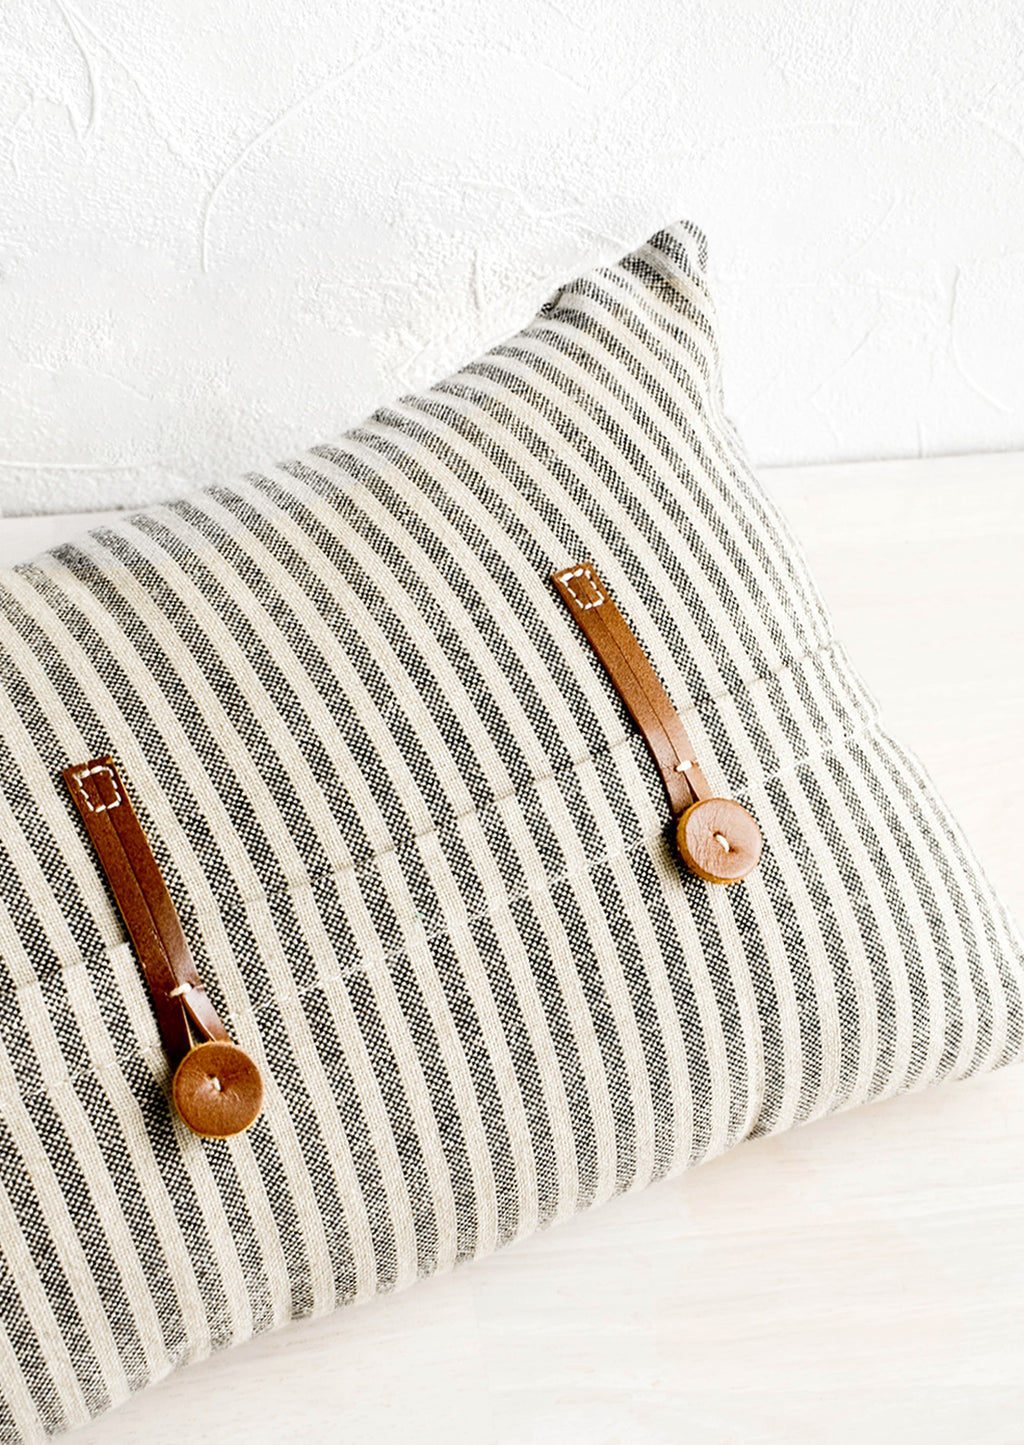 1: Striped cotton pillow in black and beige with decorative leather button detailing